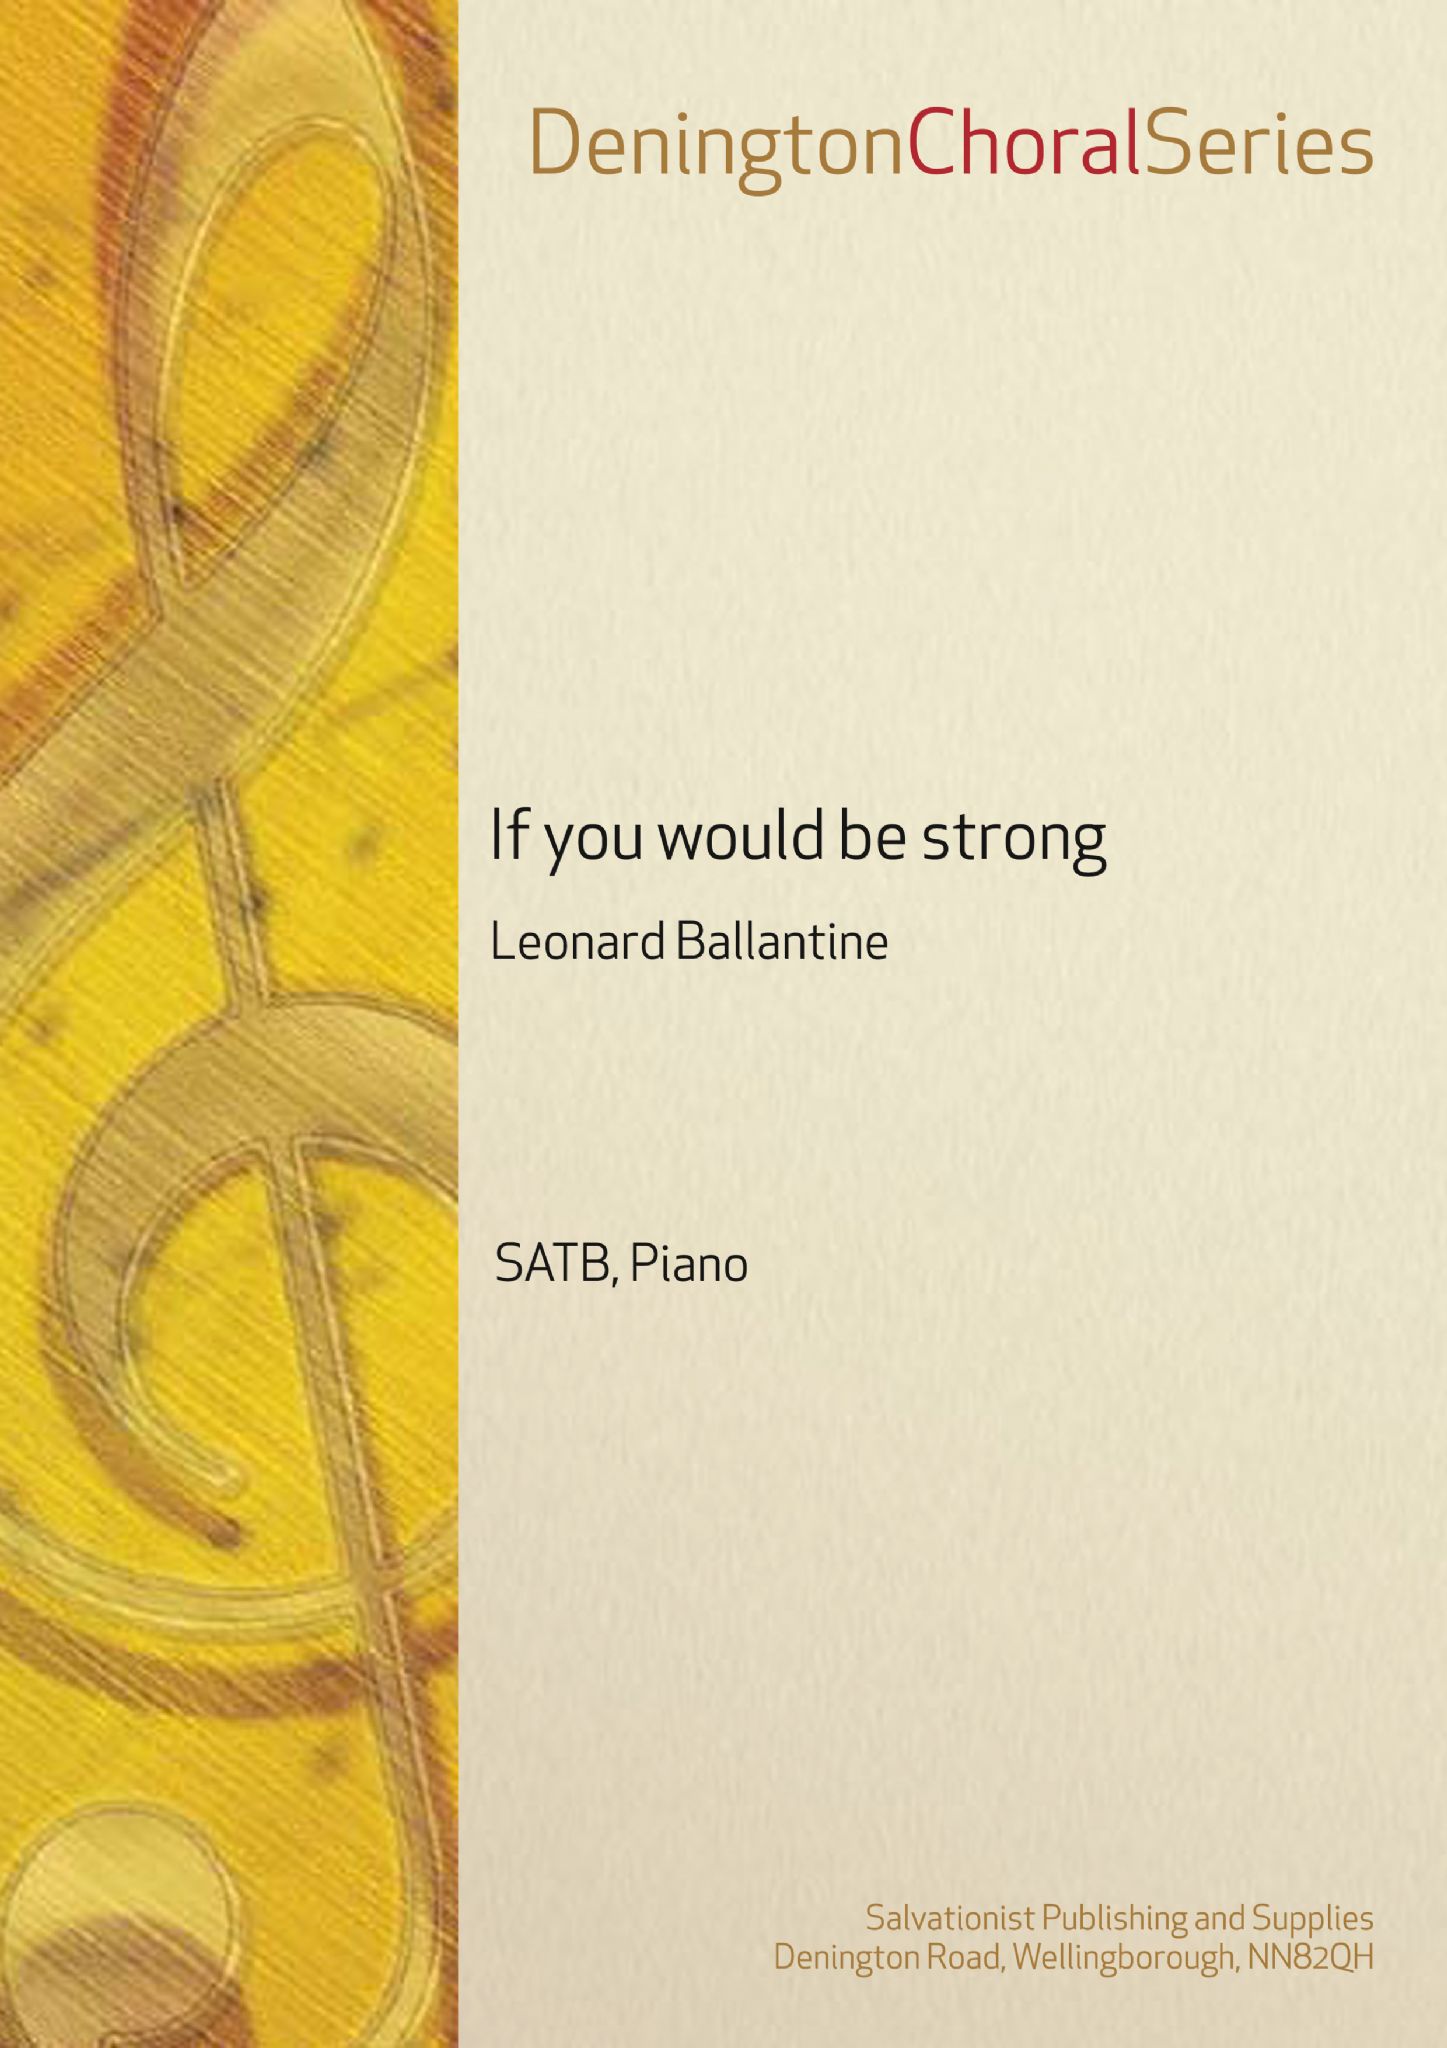 If you would be strong - SATB, Piano